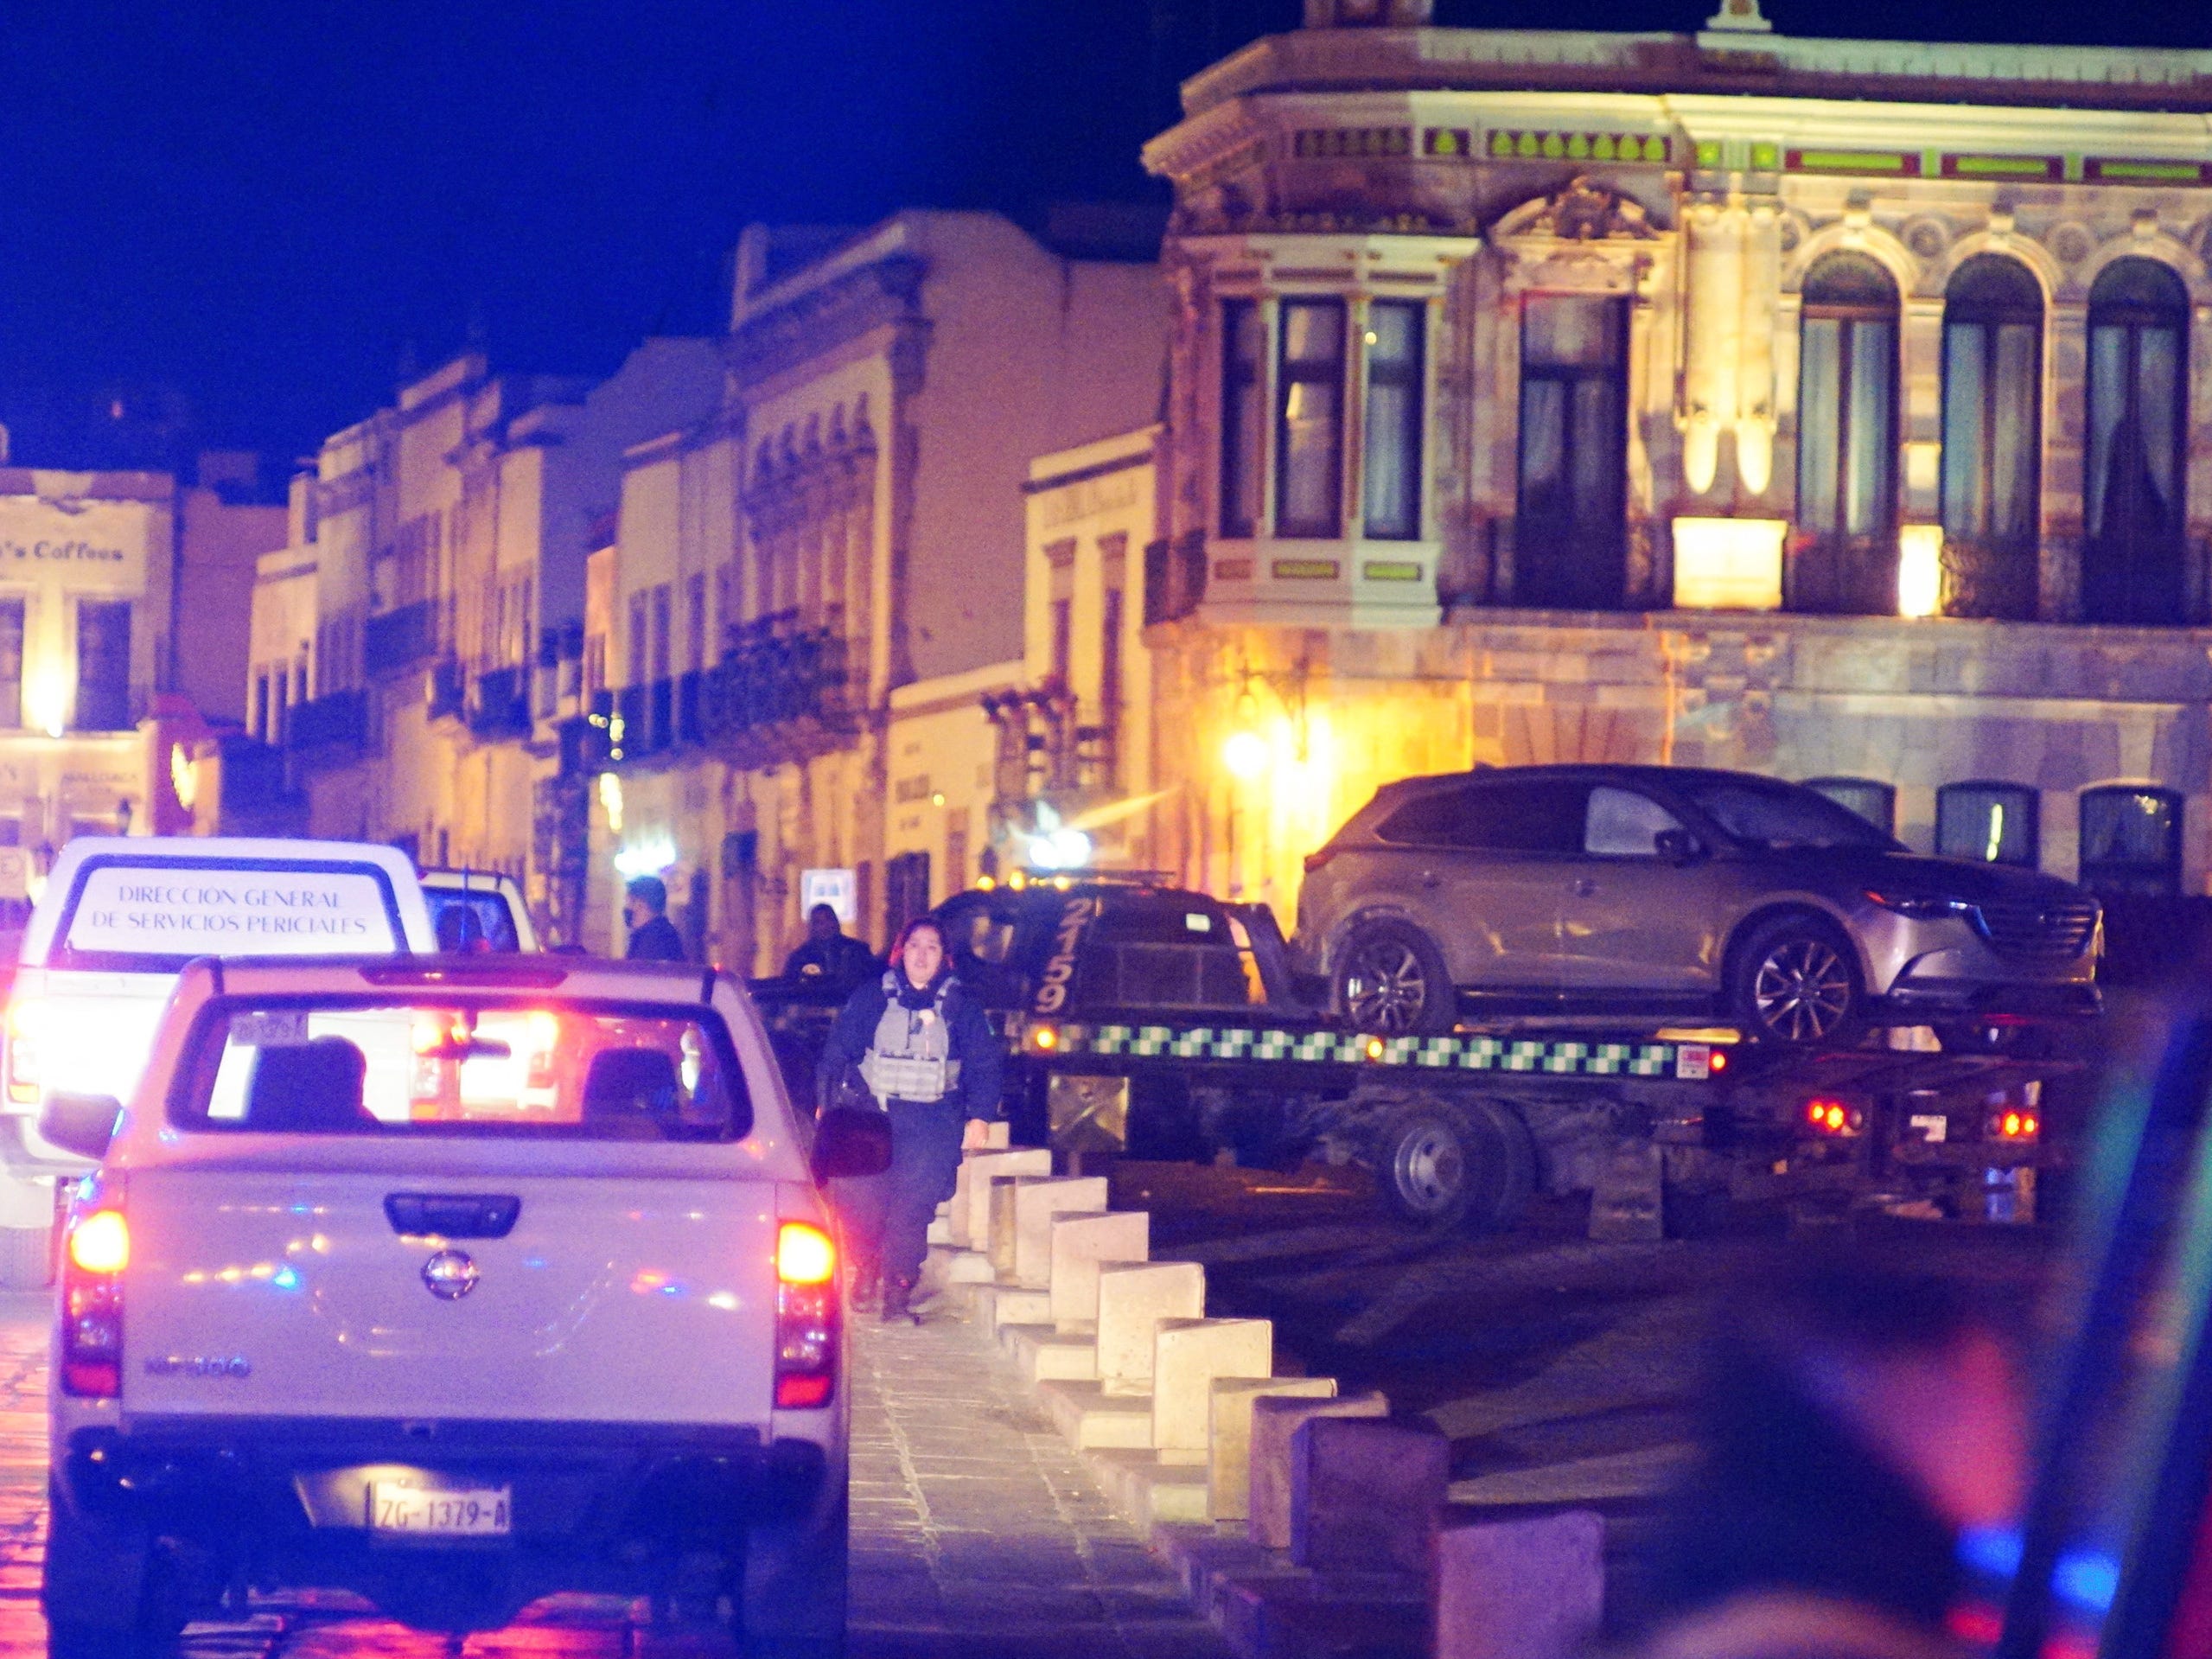 Police forces work at the scene as they remove a vehicle with bodies that were left by unknown assailants in front of the Government Palace, in Zacatecas, Mexico.